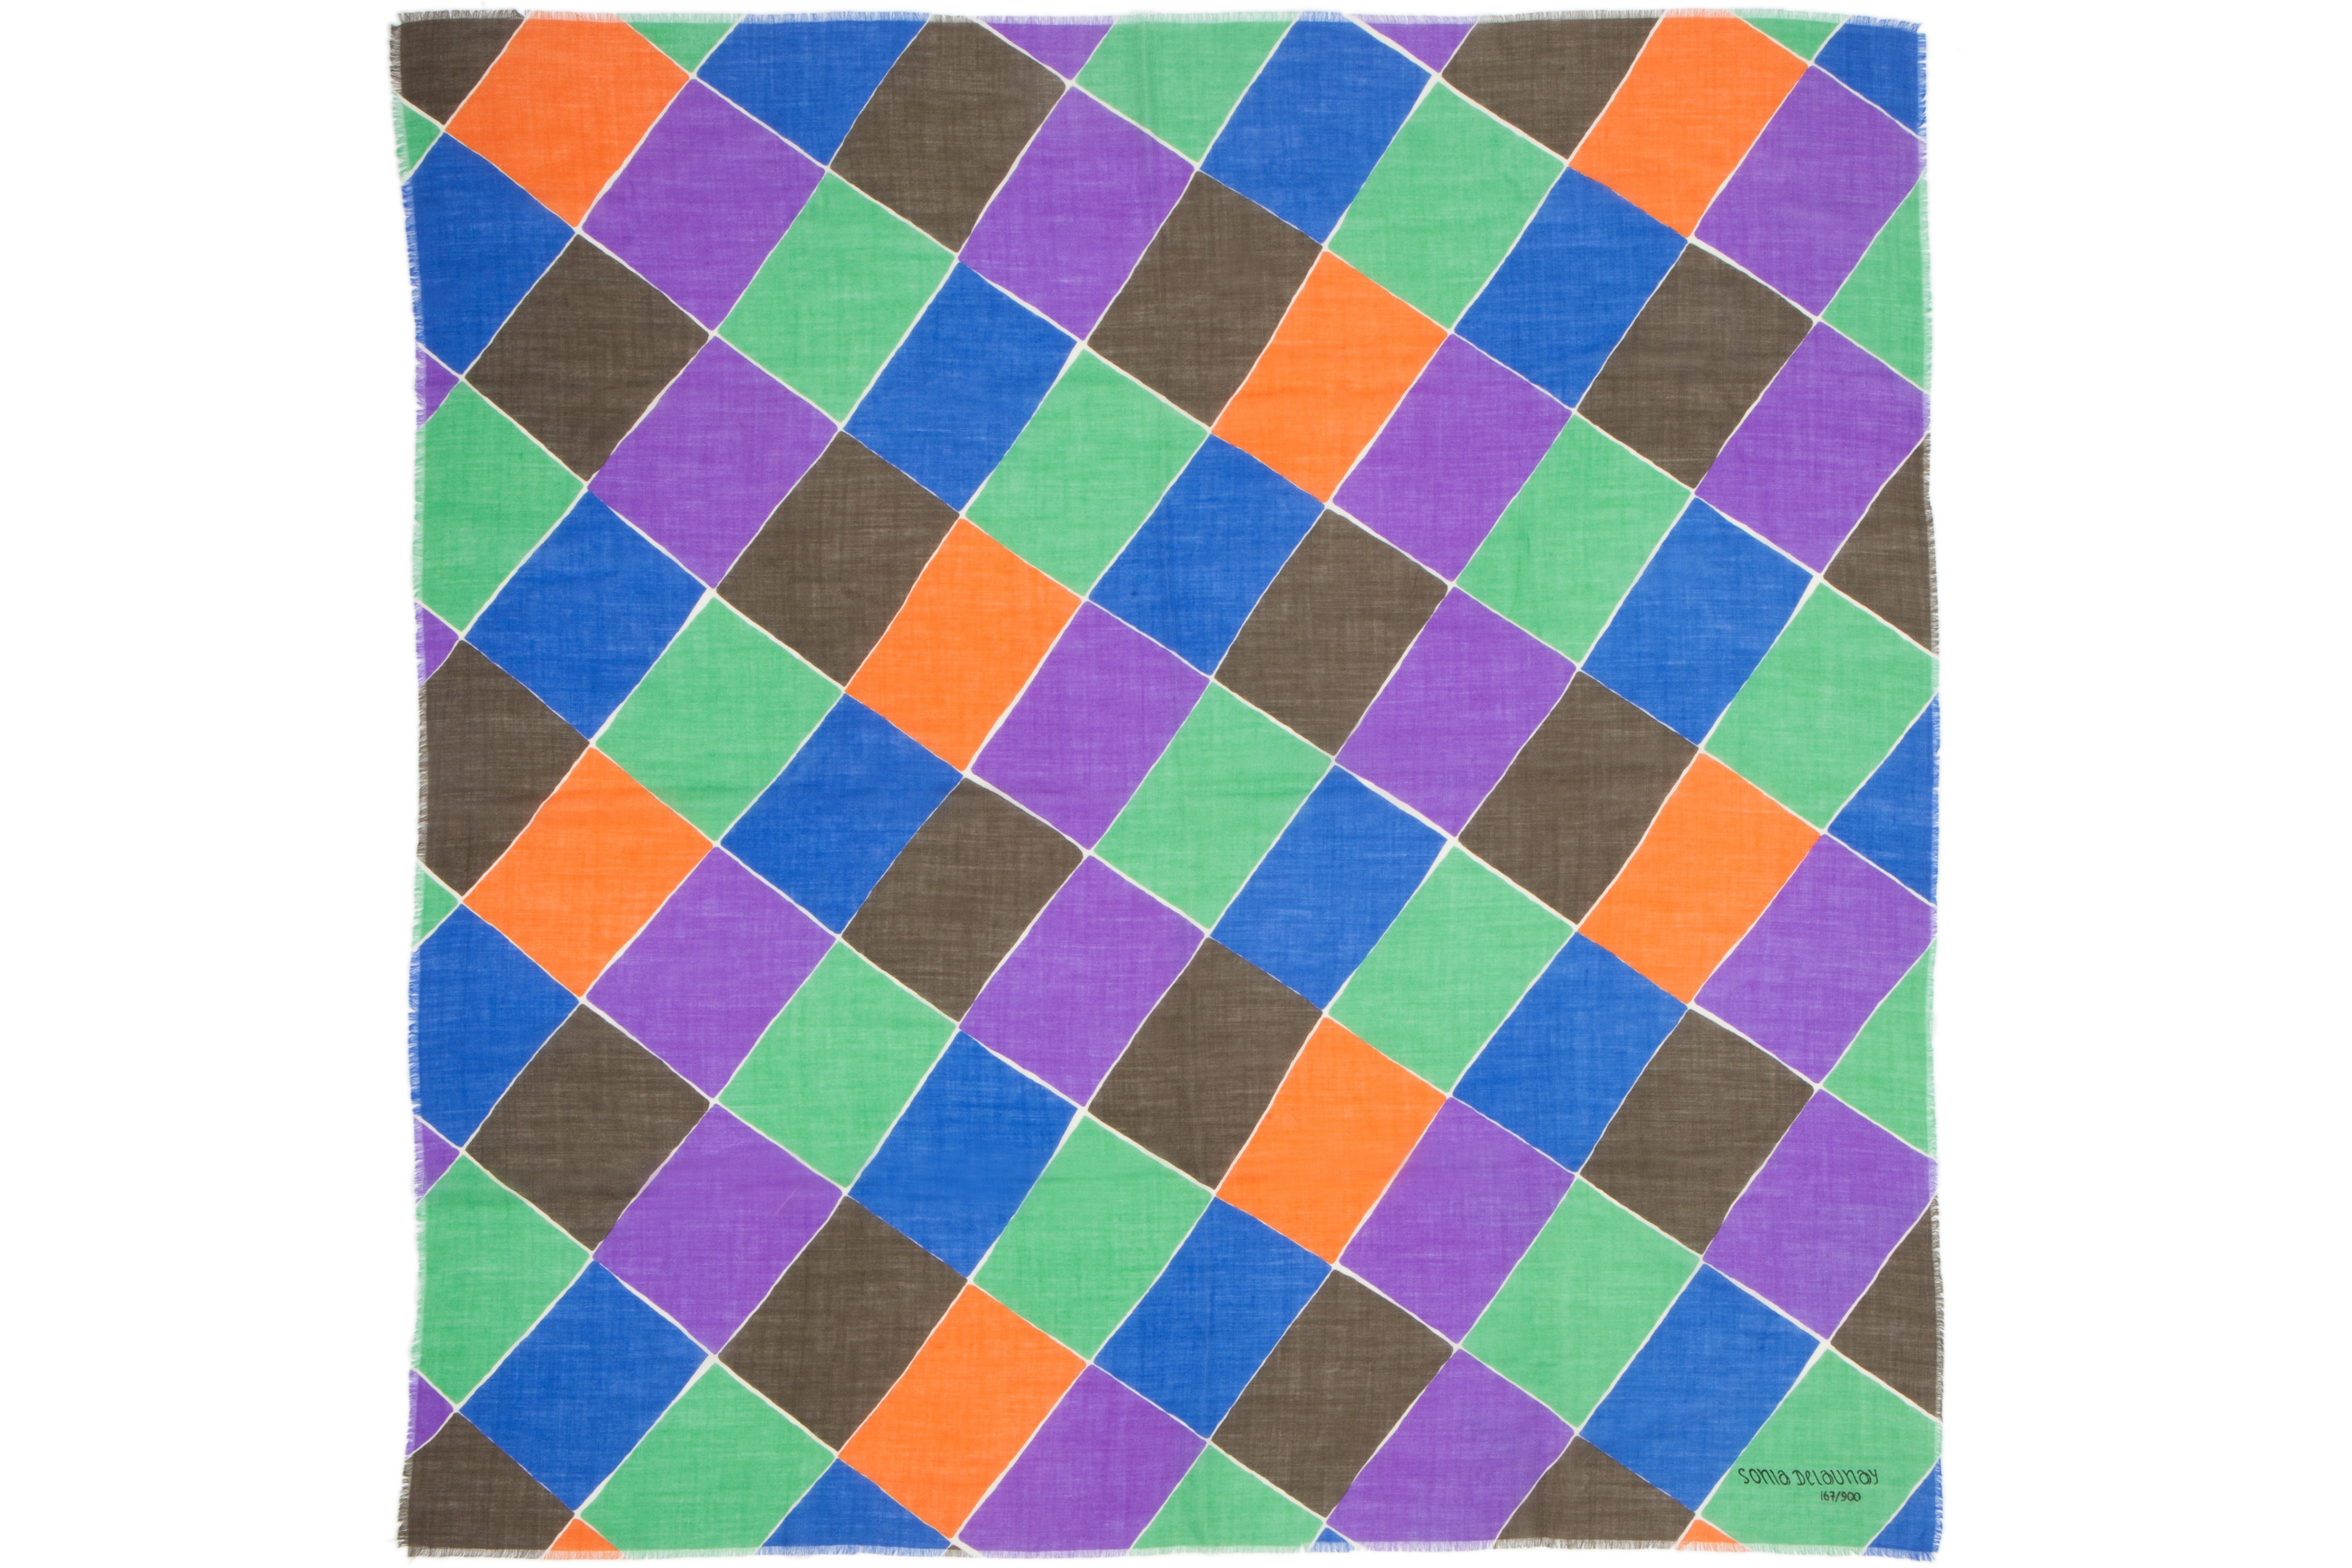 Sonia Delaunay " A Damiers" Textile